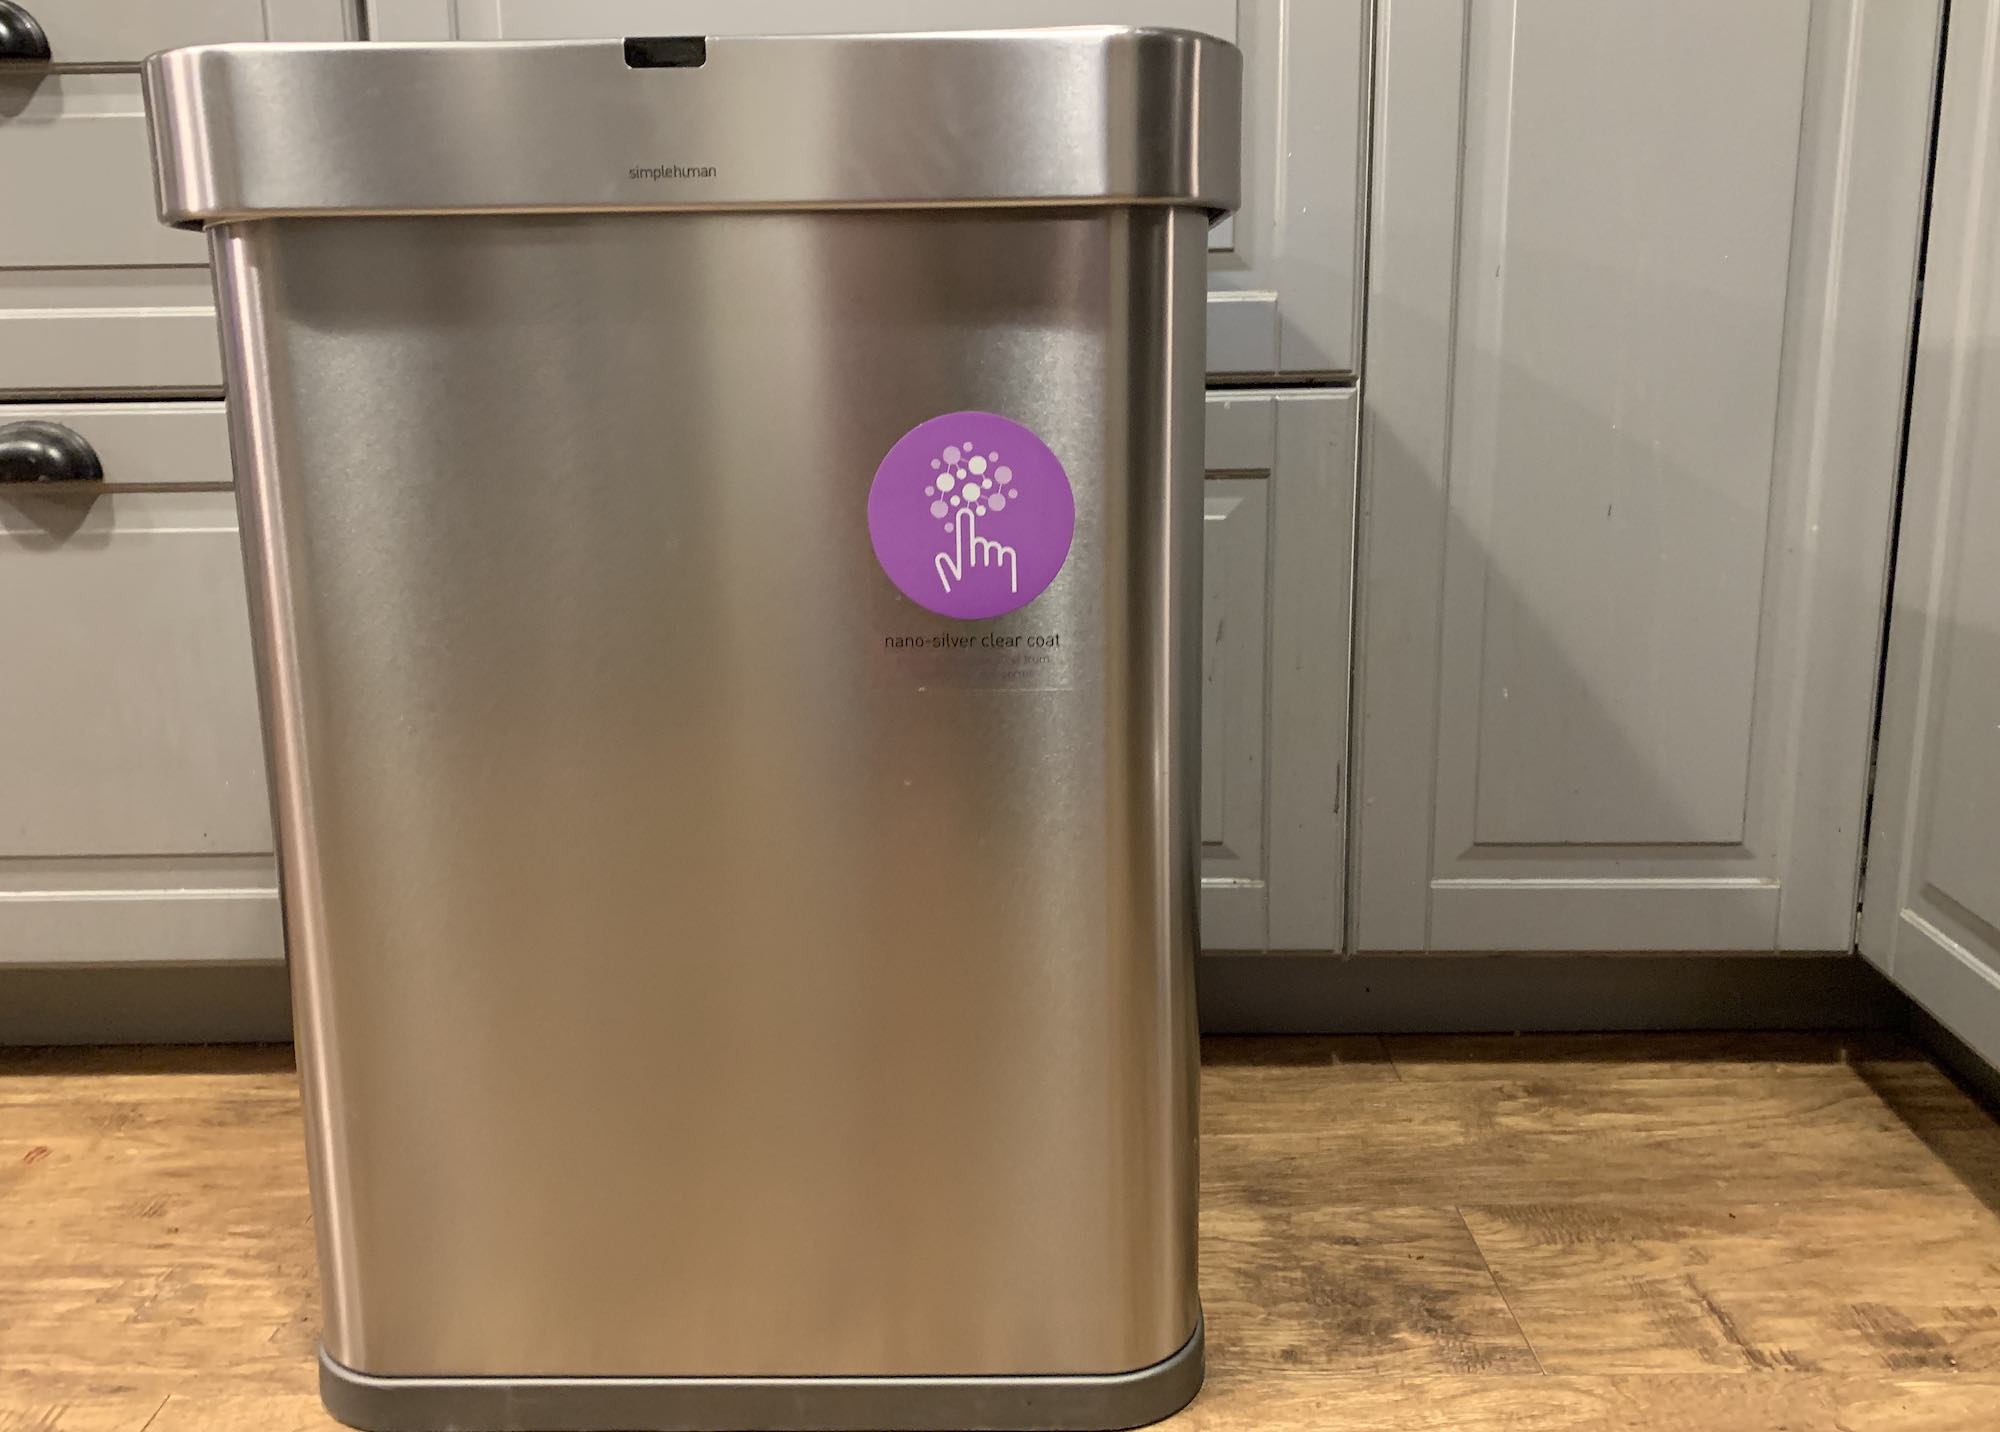 Simplehuman's new trash cans have voice commands and Wi-Fi - The Verge